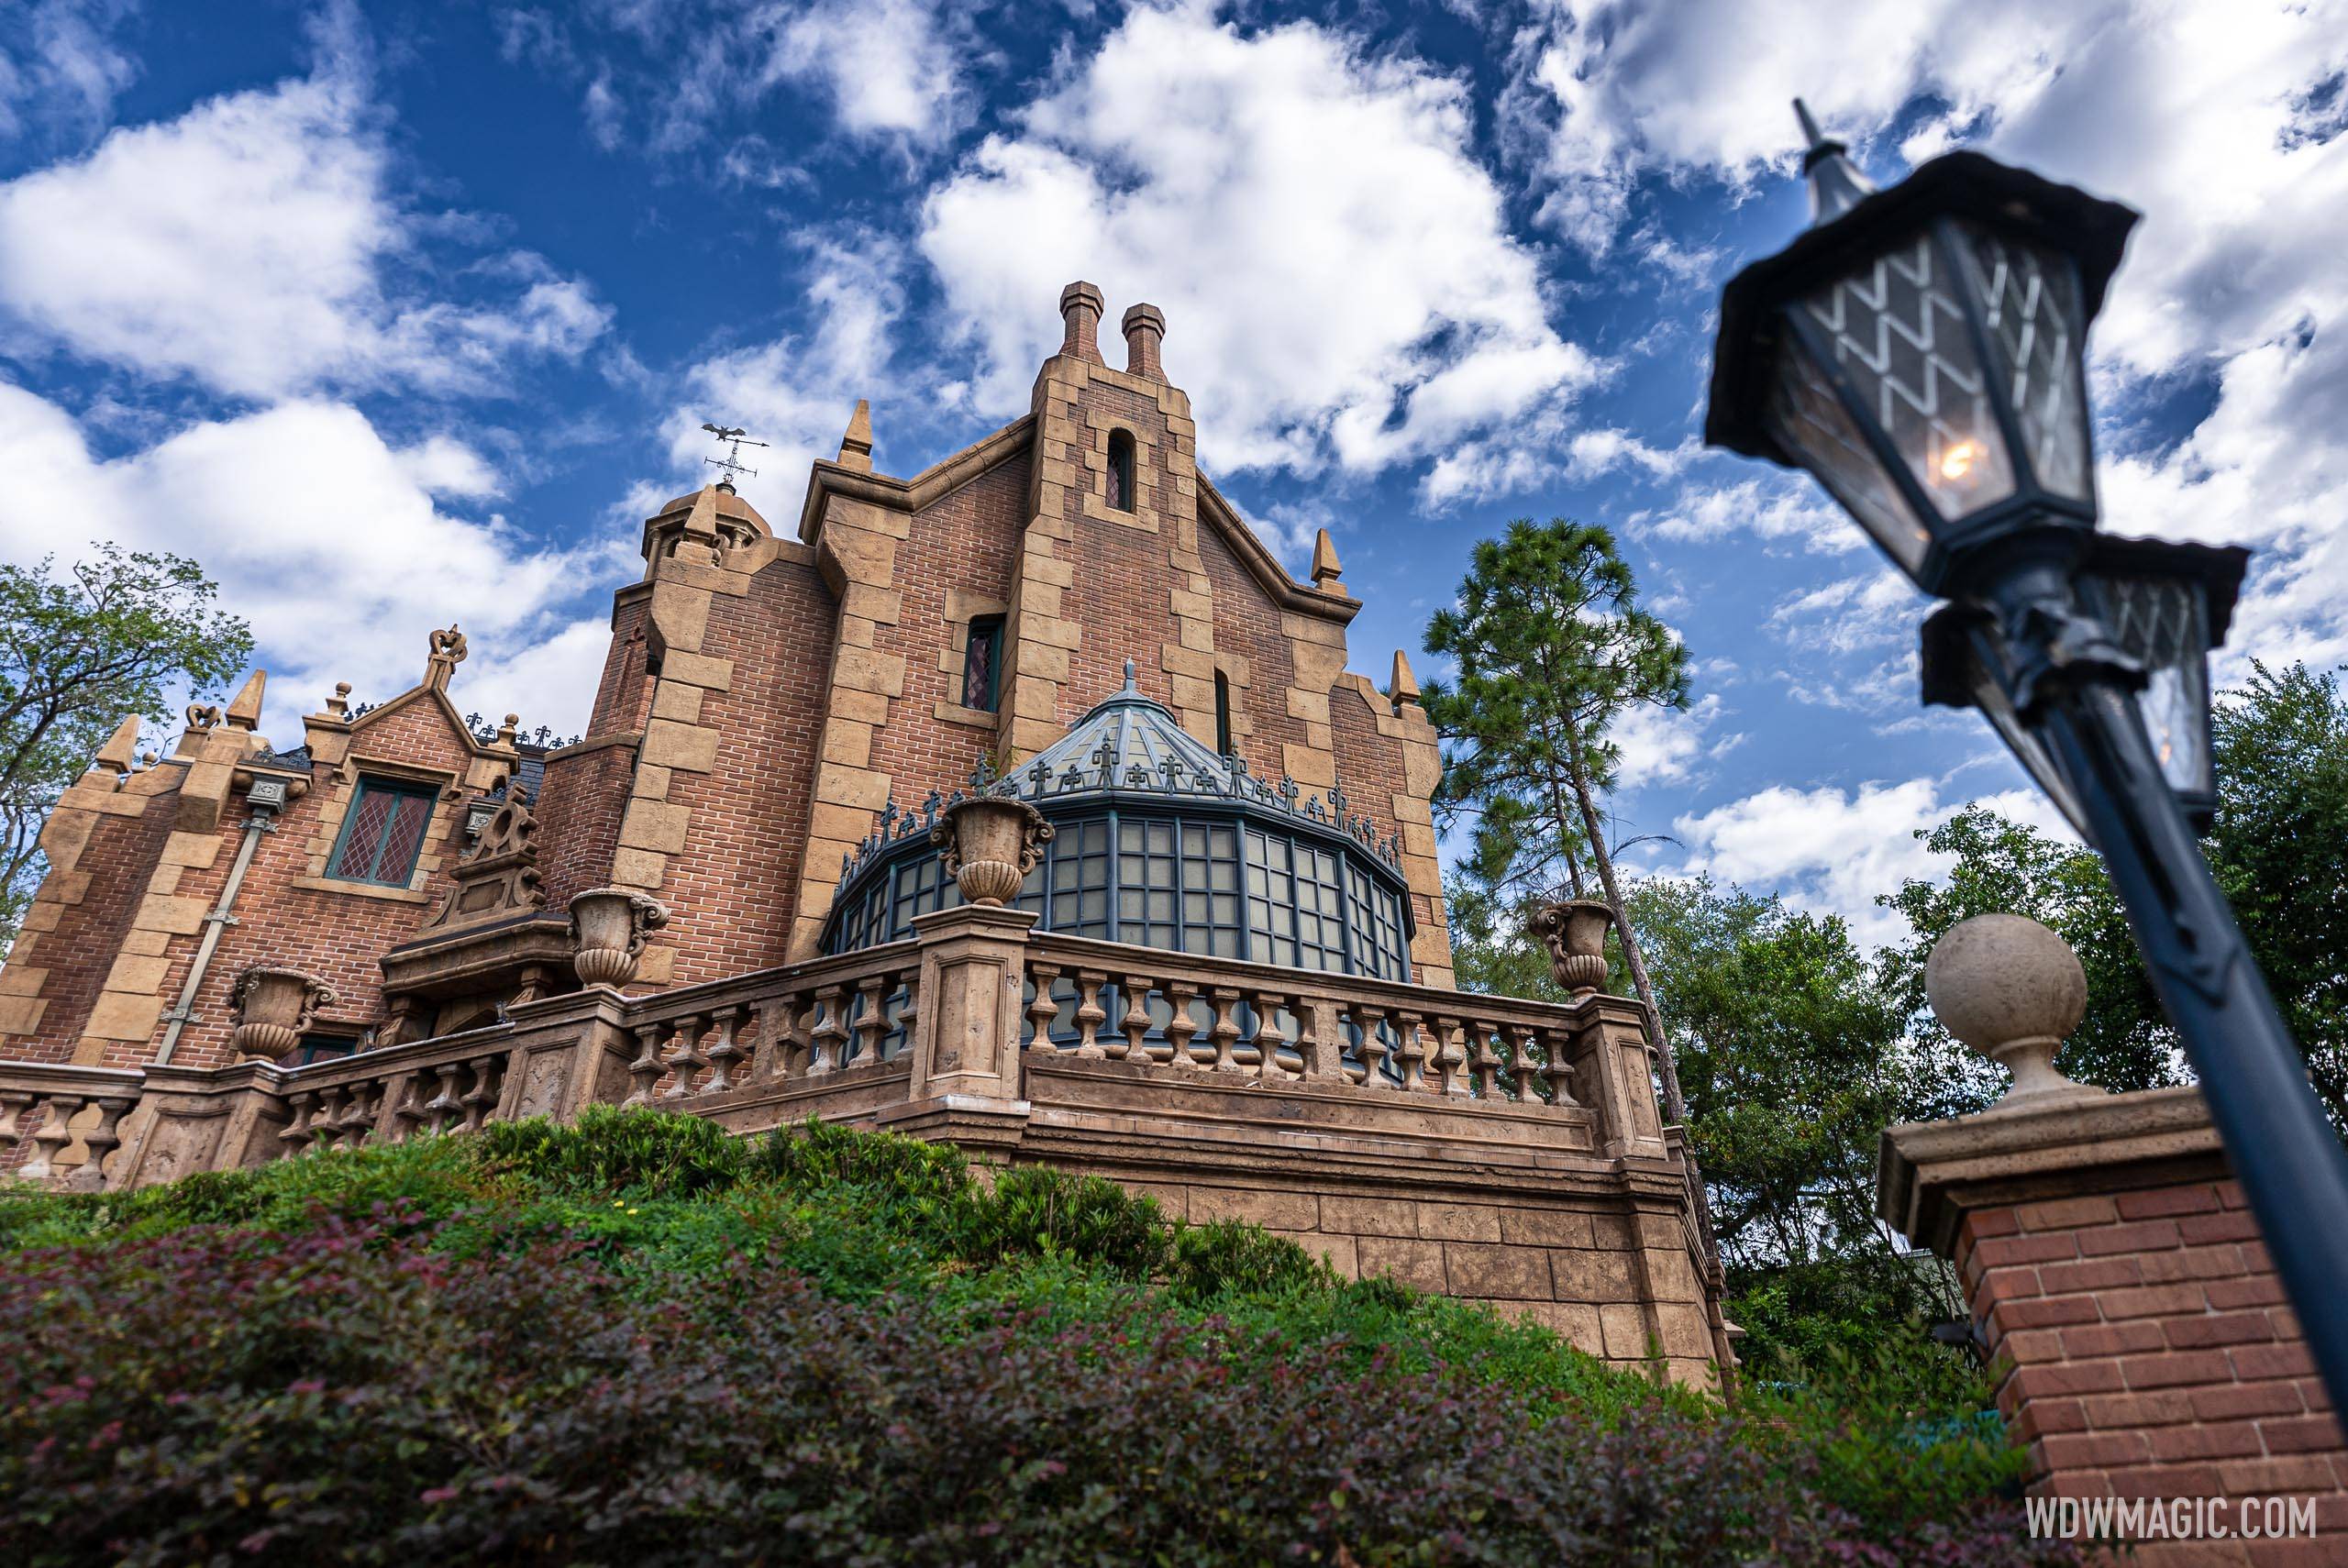 Haunted Mansion reopens from refurbishment a week ahead of schedule